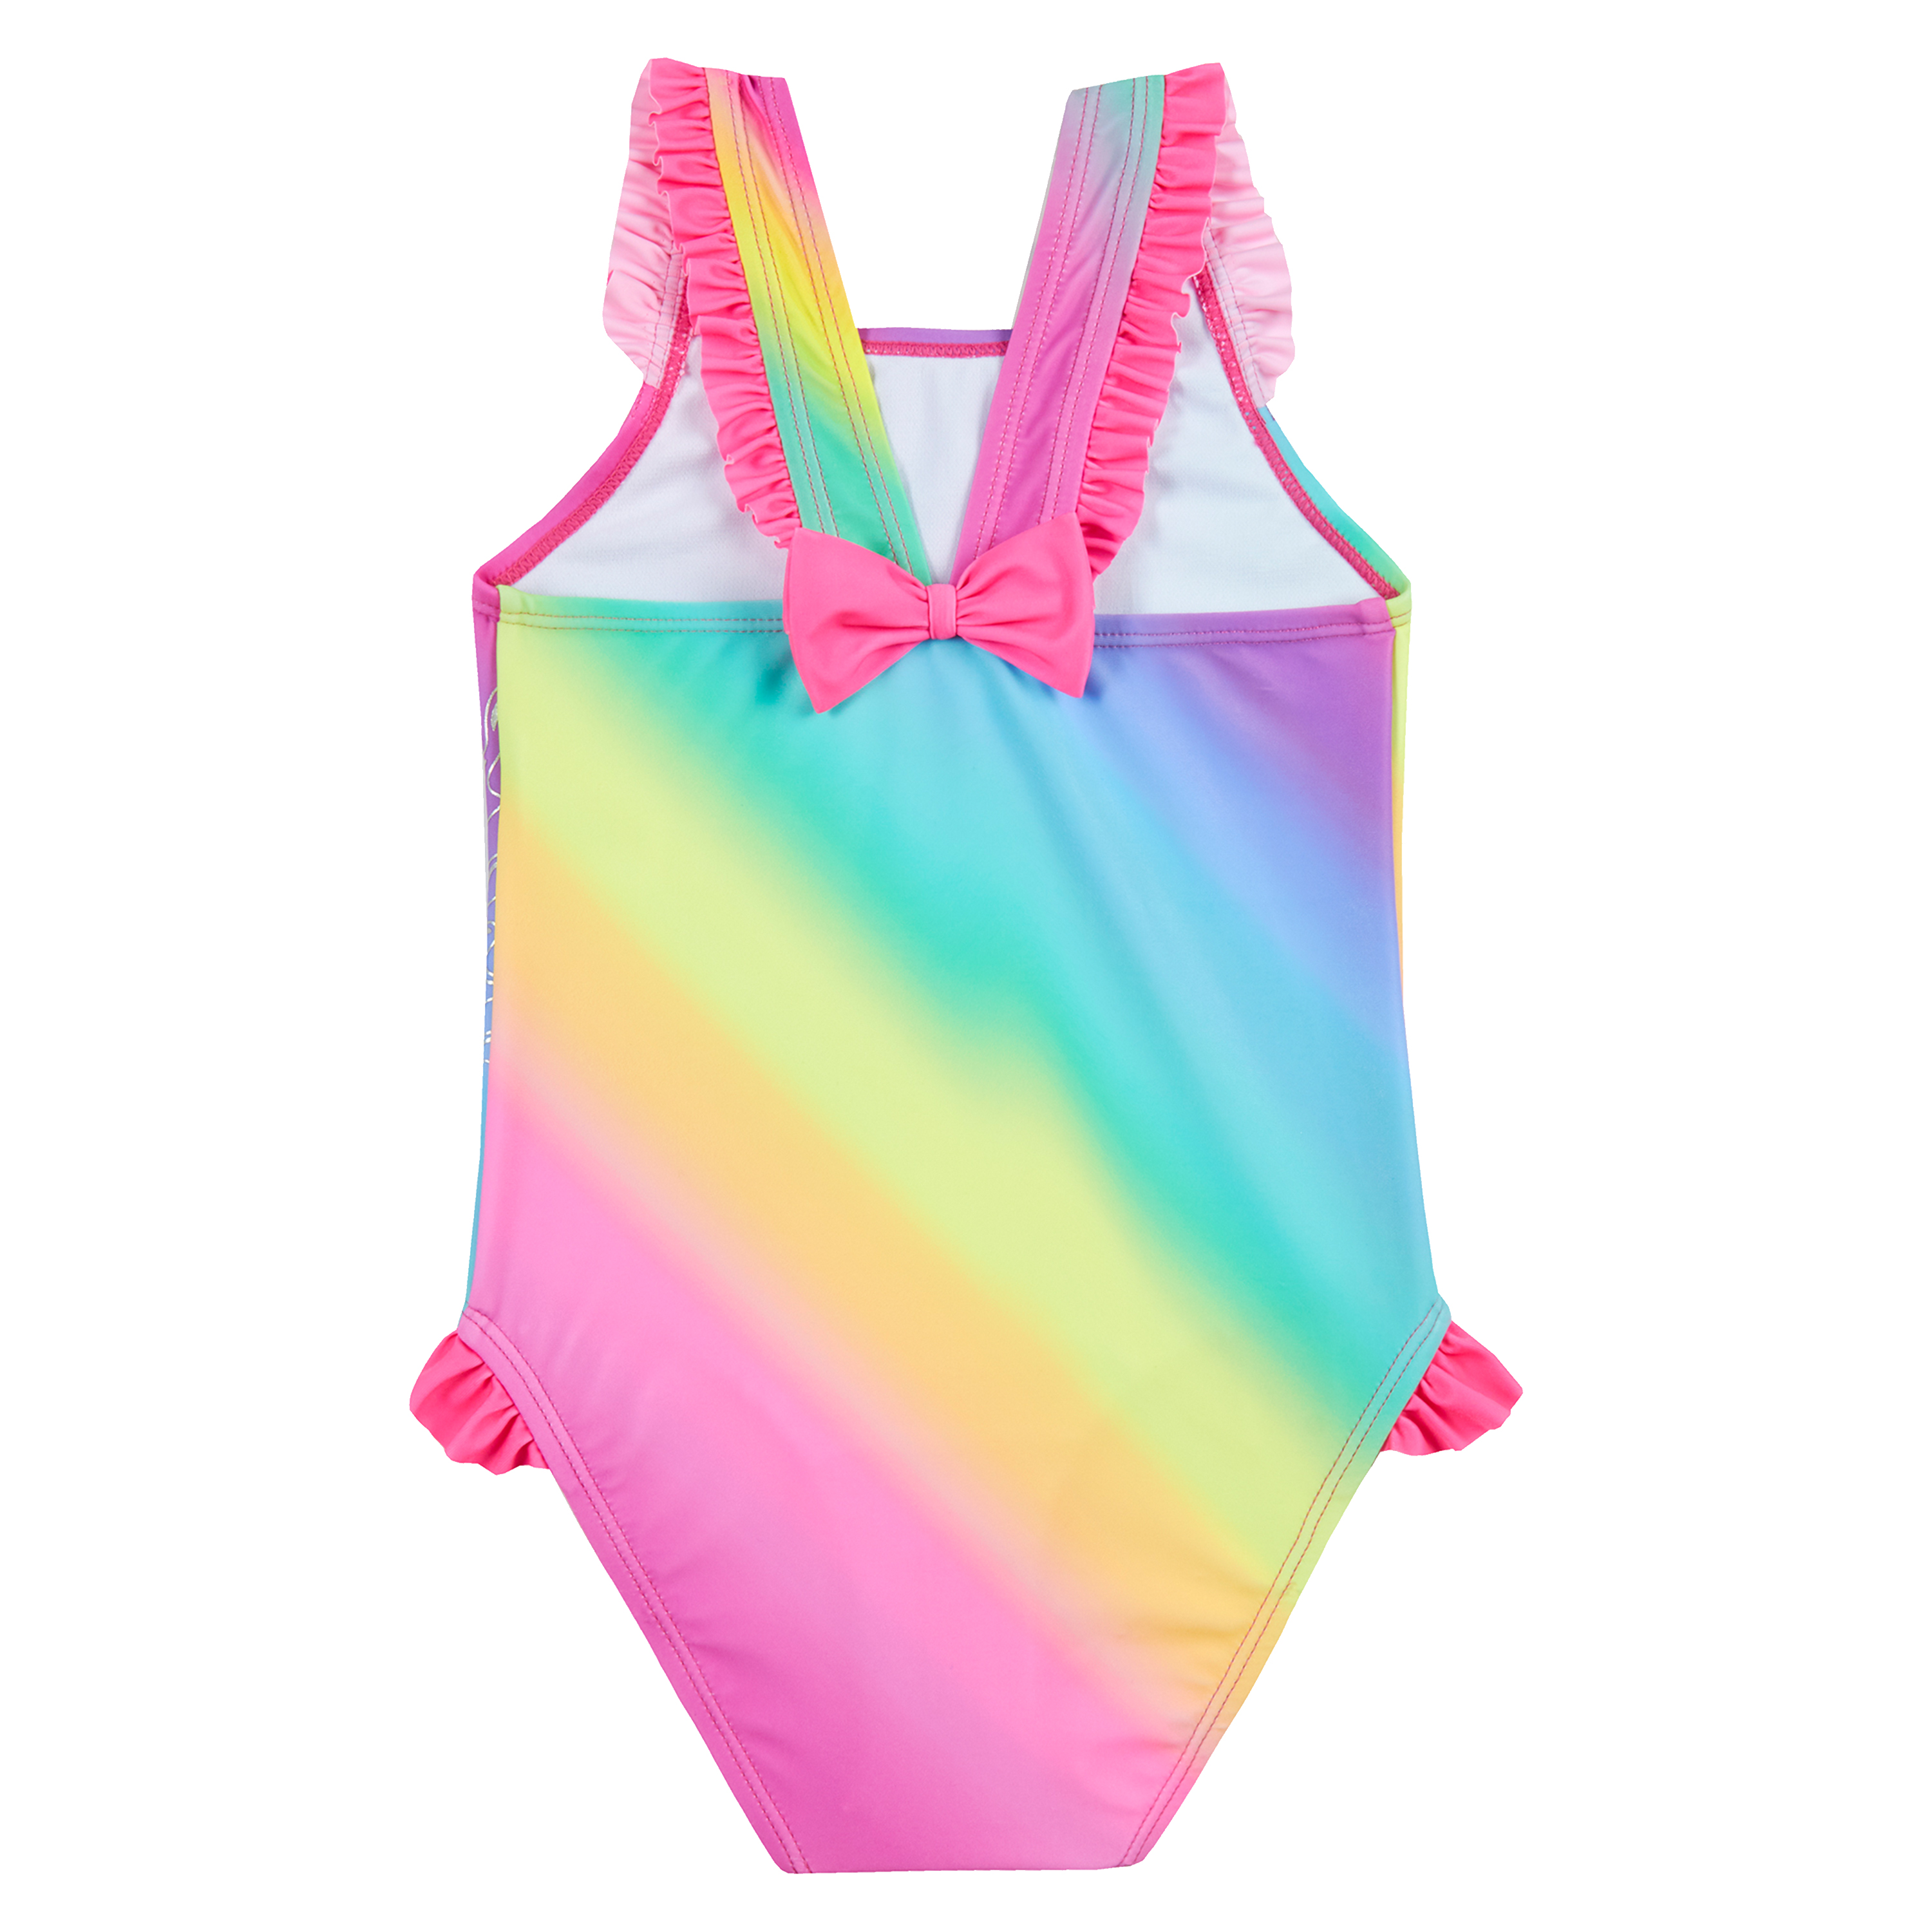 Kids Girls Toddler Swimsuit Costume Rainbow Size 2-3 3-4 4-5 5-6 with ...